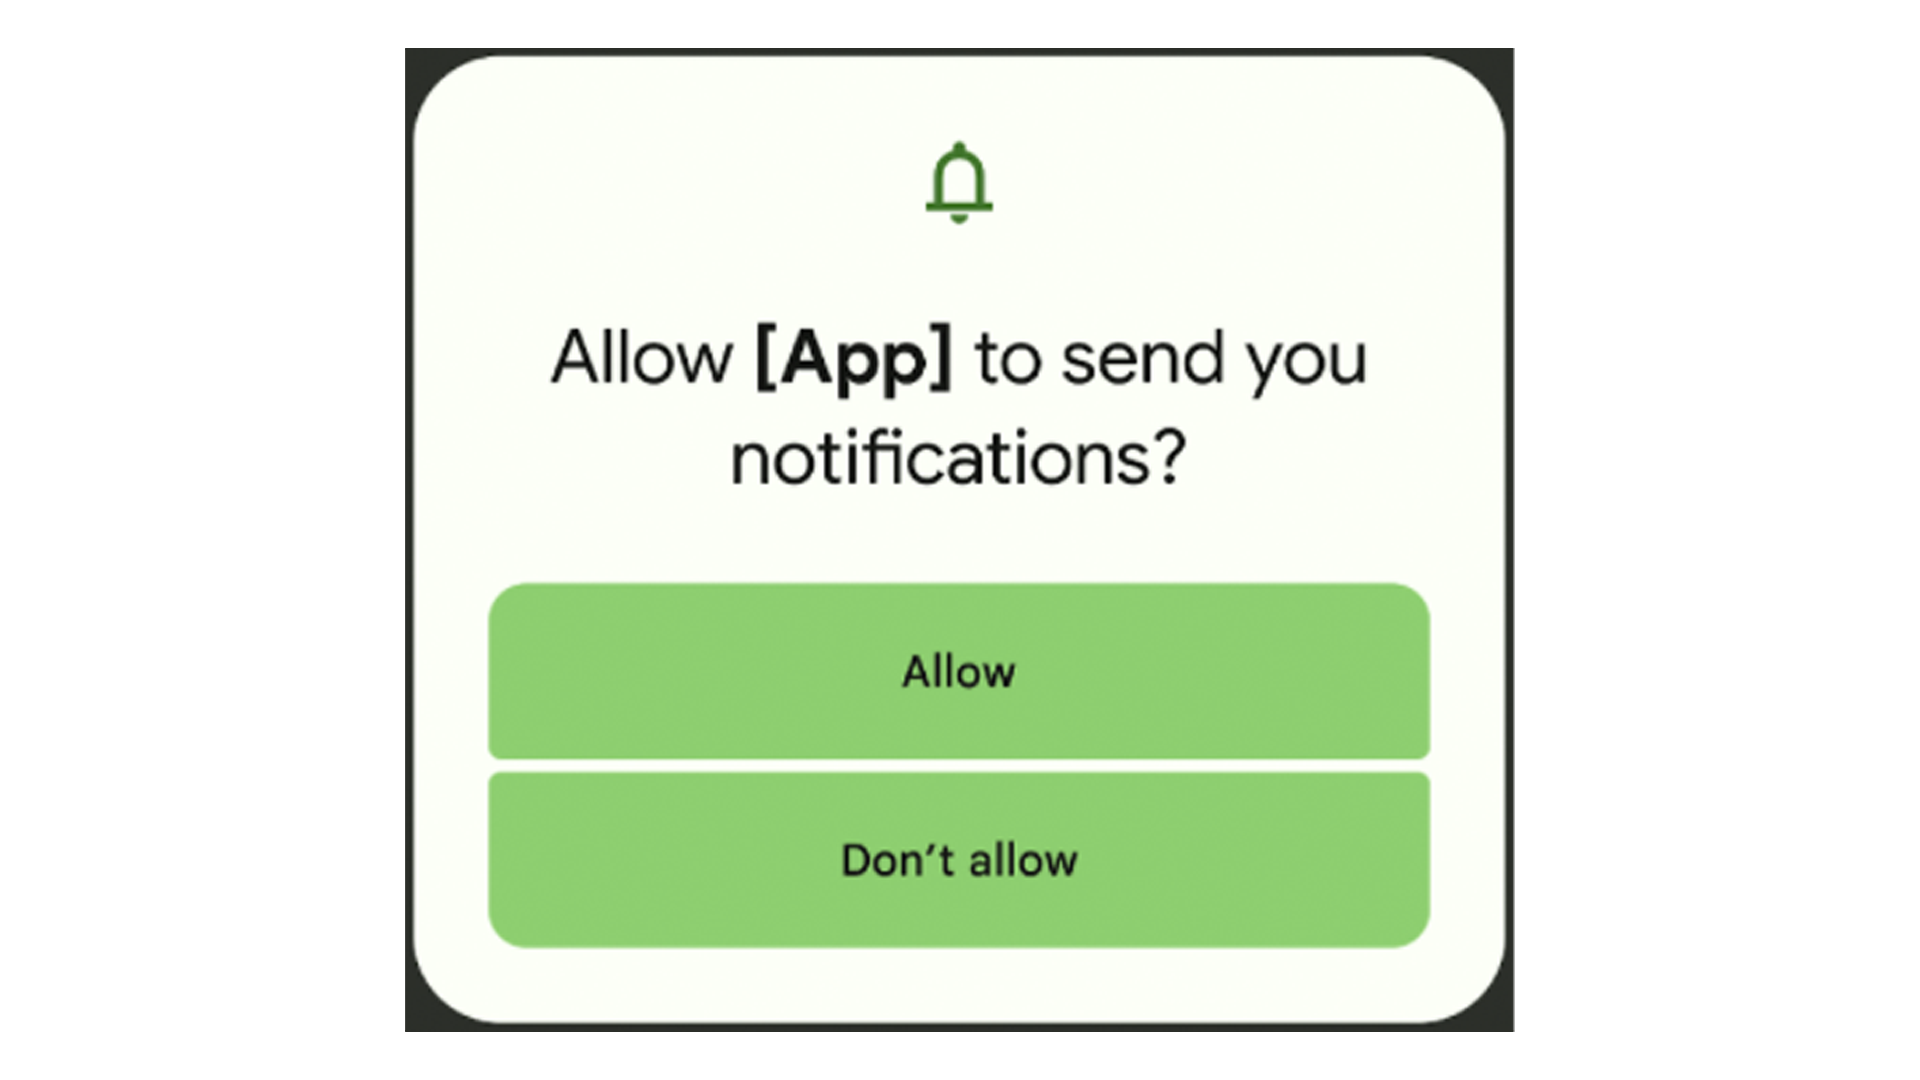 All app will need to ask permission to send you notifications in Android 13.